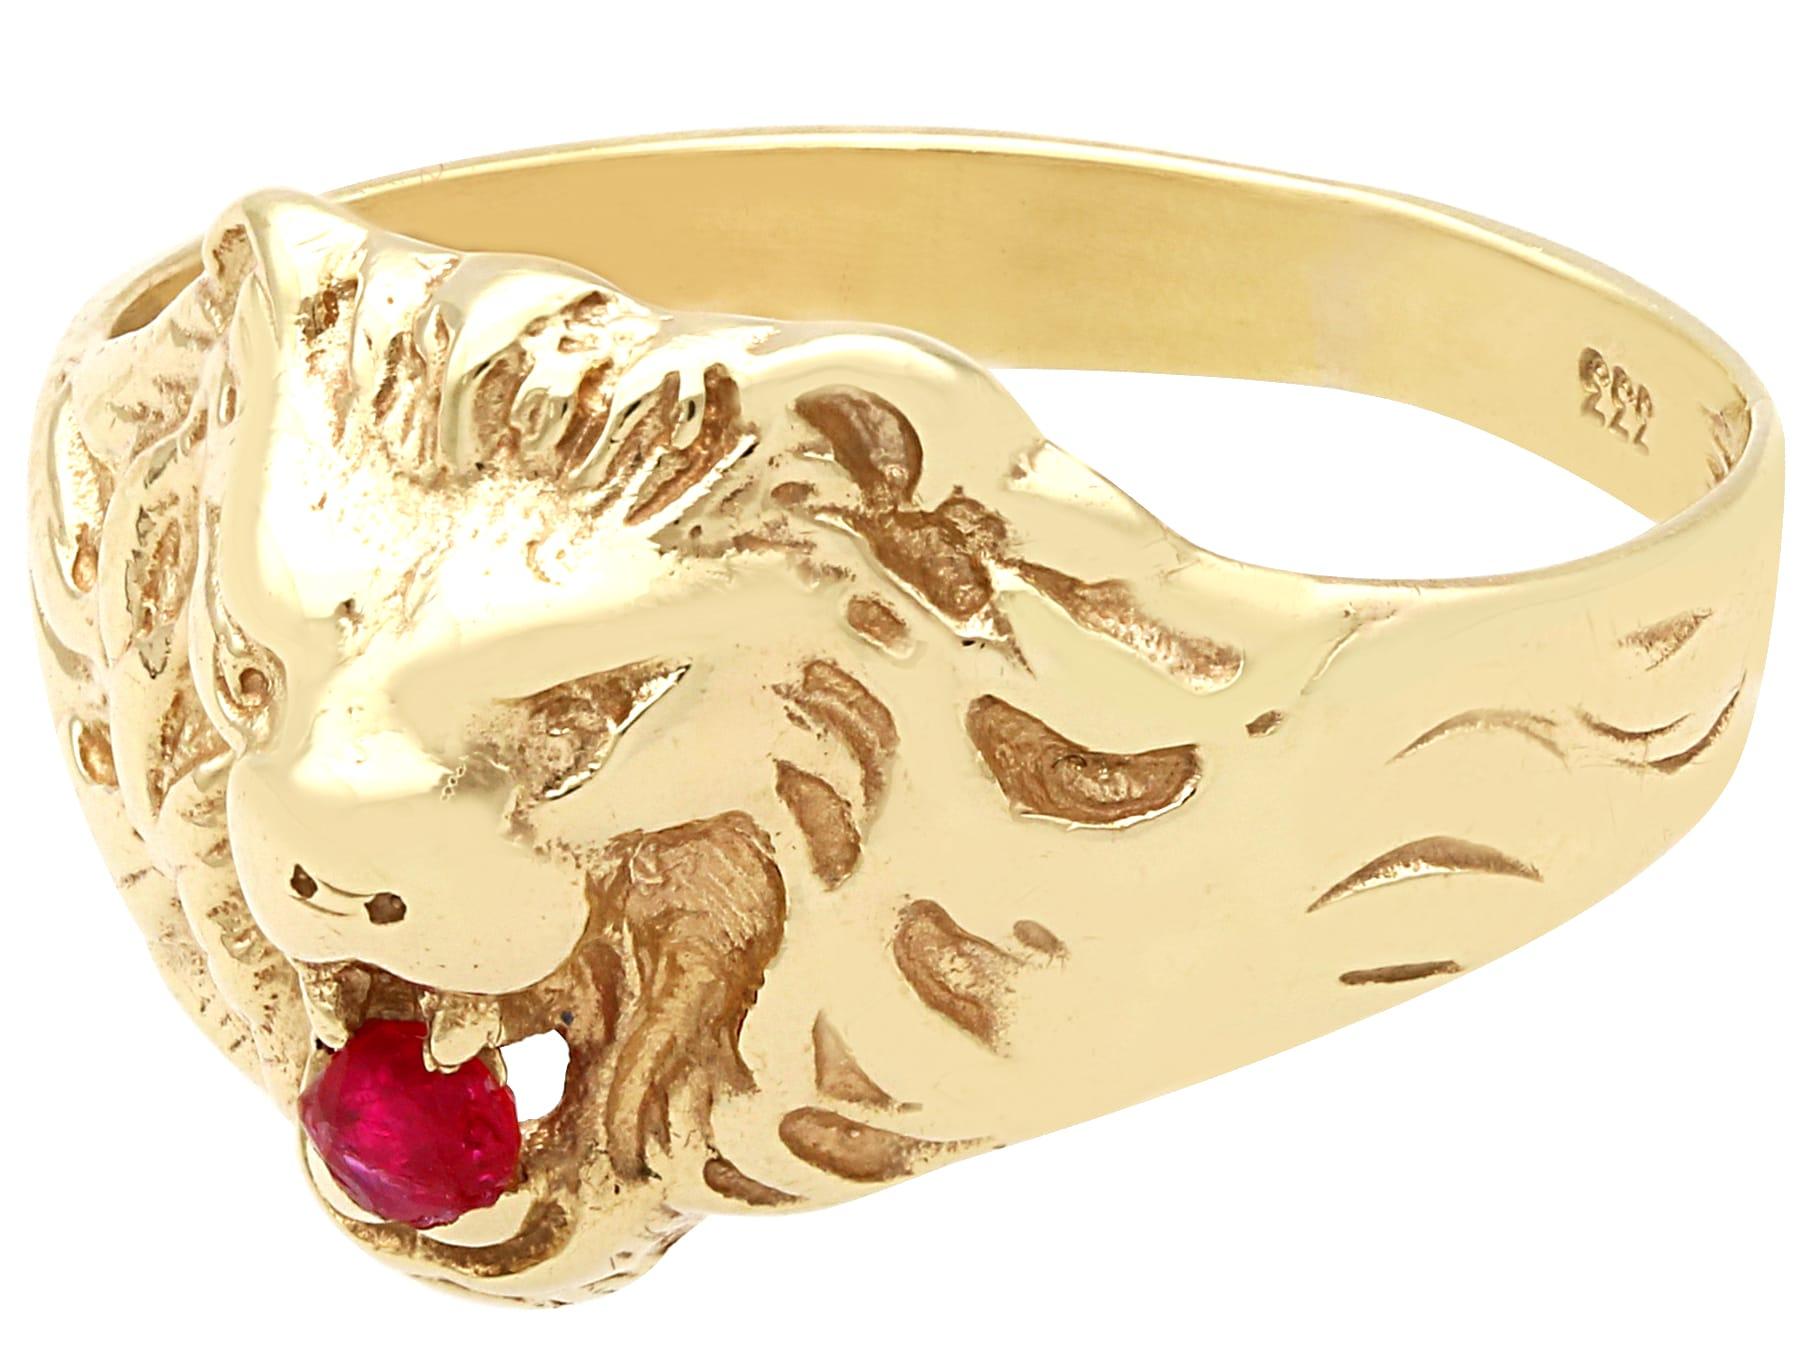 A fine and impressive men's vintage 1960s 0.06 carat ruby and 9 karat yellow gold lion ring; part of our diverse vintage 1960s jewelry collections.

This fine and impressive vintage ruby ring has been crafted in 9k yellow gold.

The ring has been